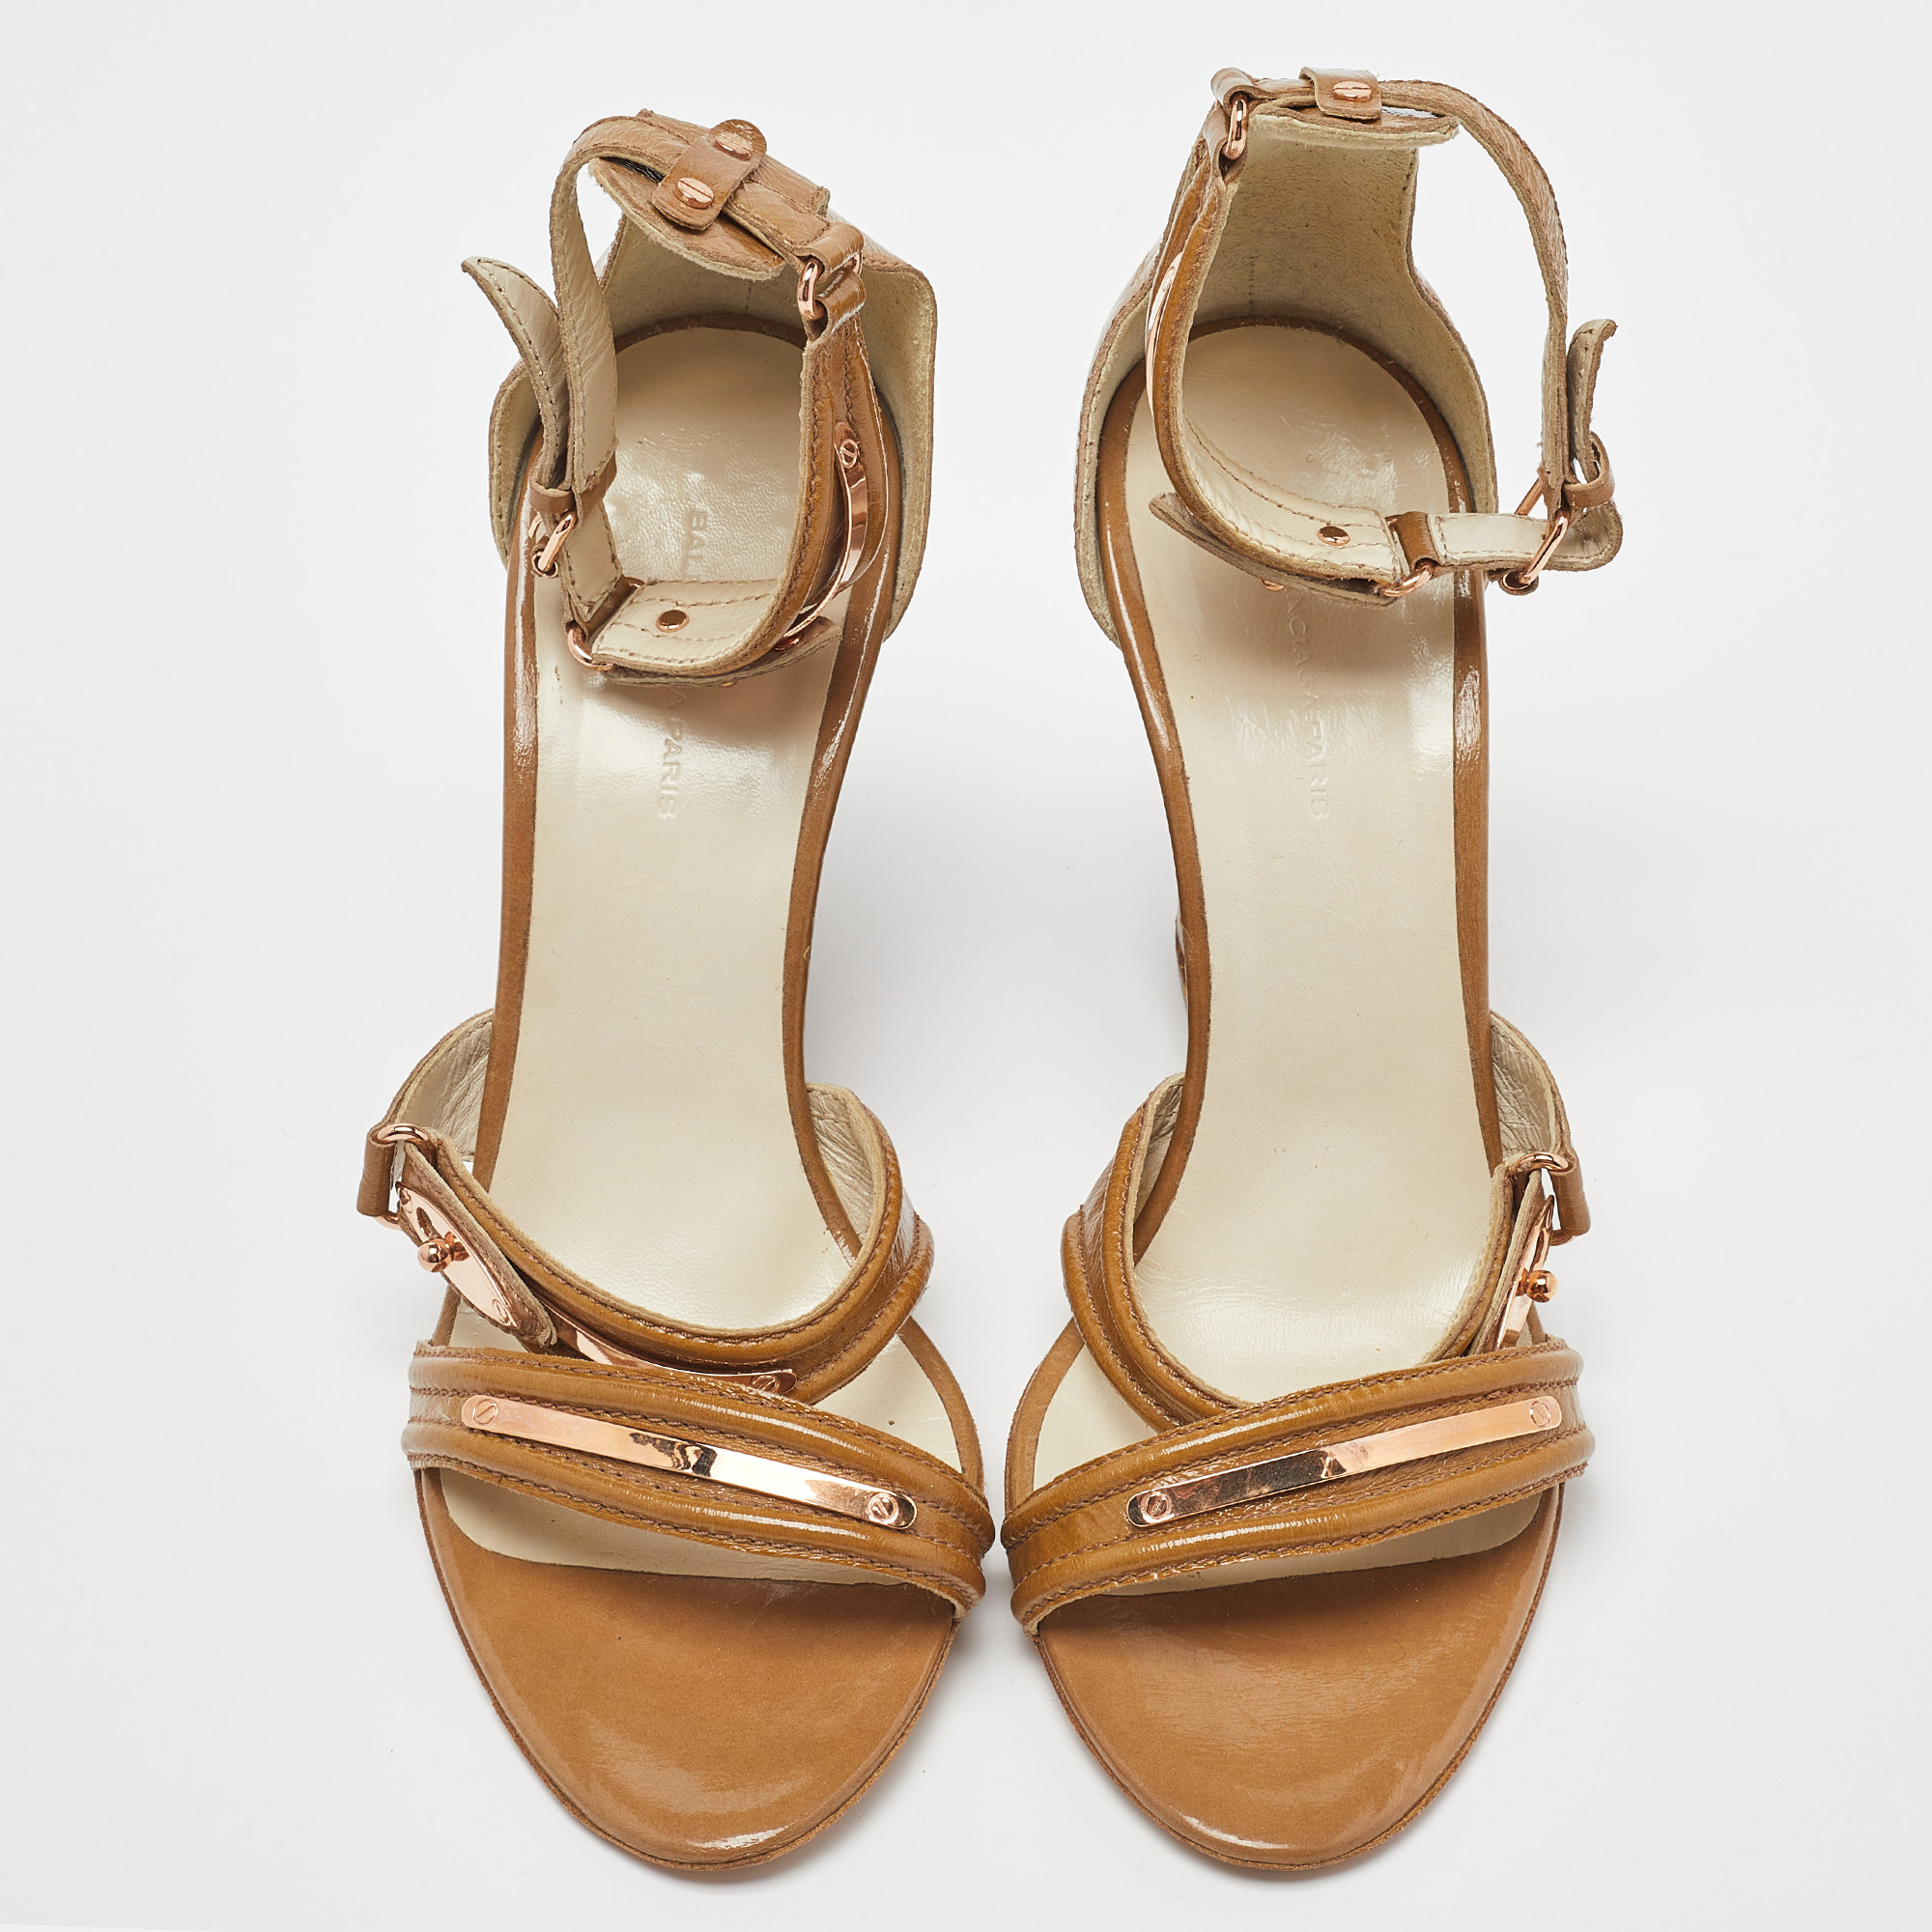 Balenciaga Beige Patent Leather Wedge Ankle Strap Sandals Size 41